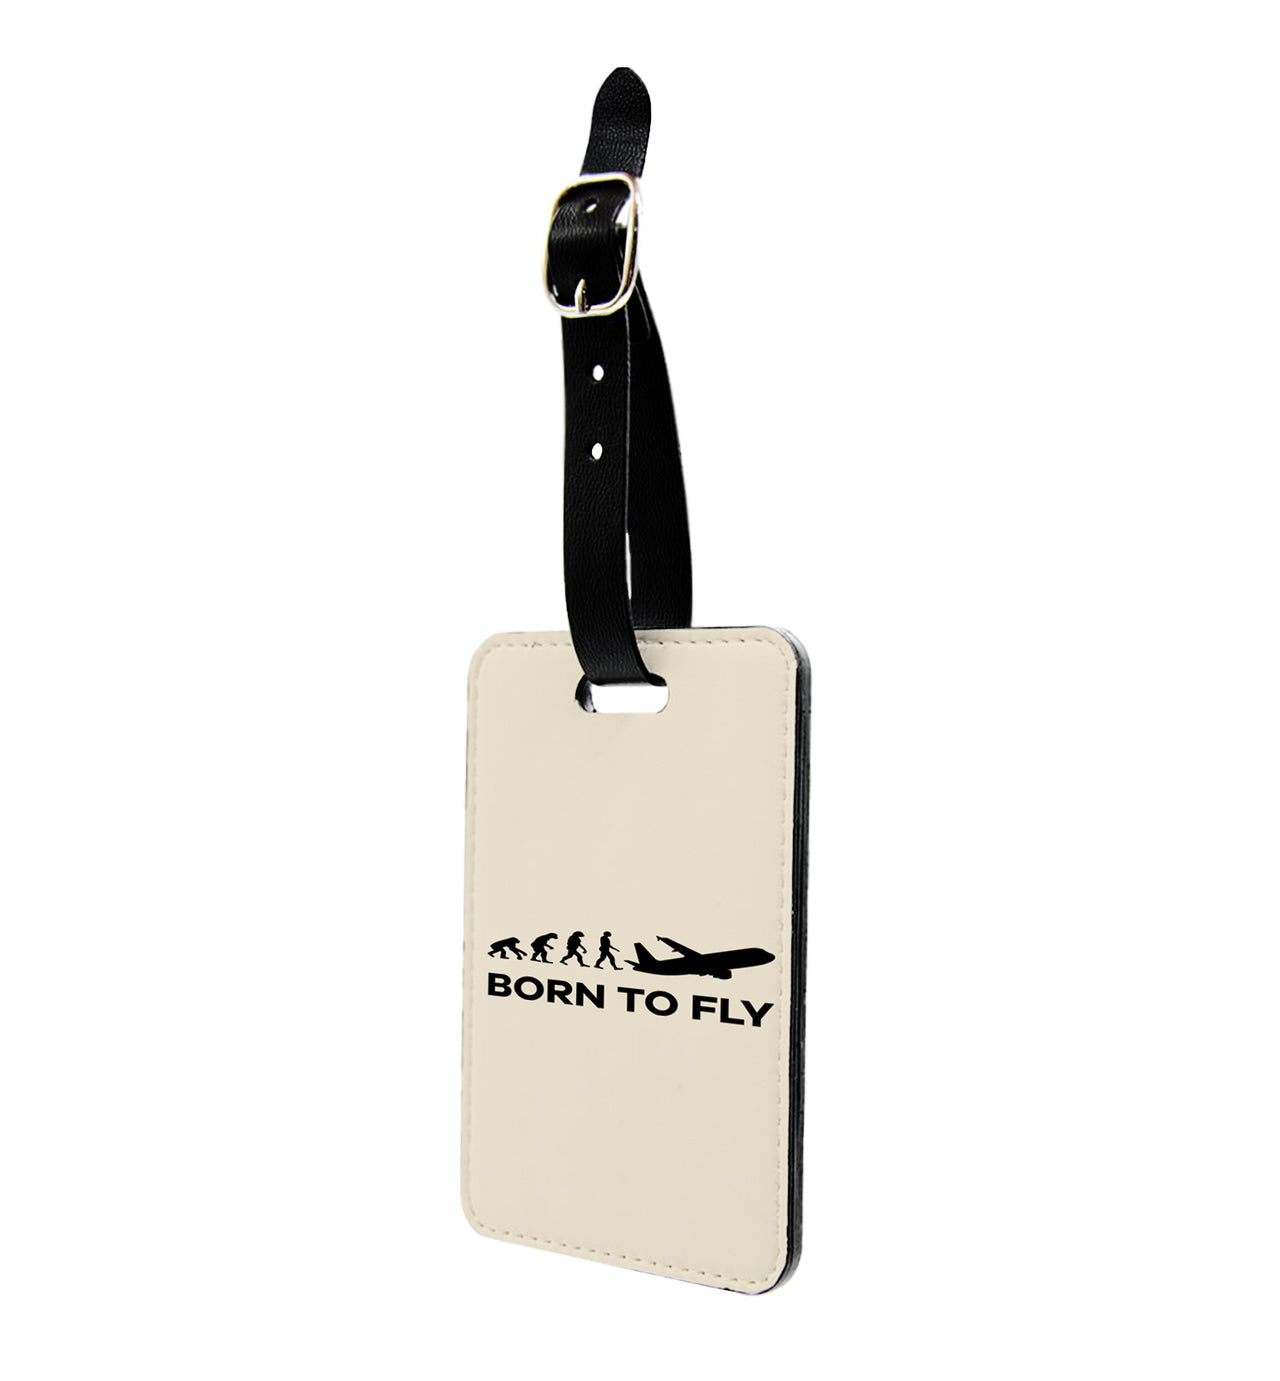 Born To Fly Designed Luggage Tag